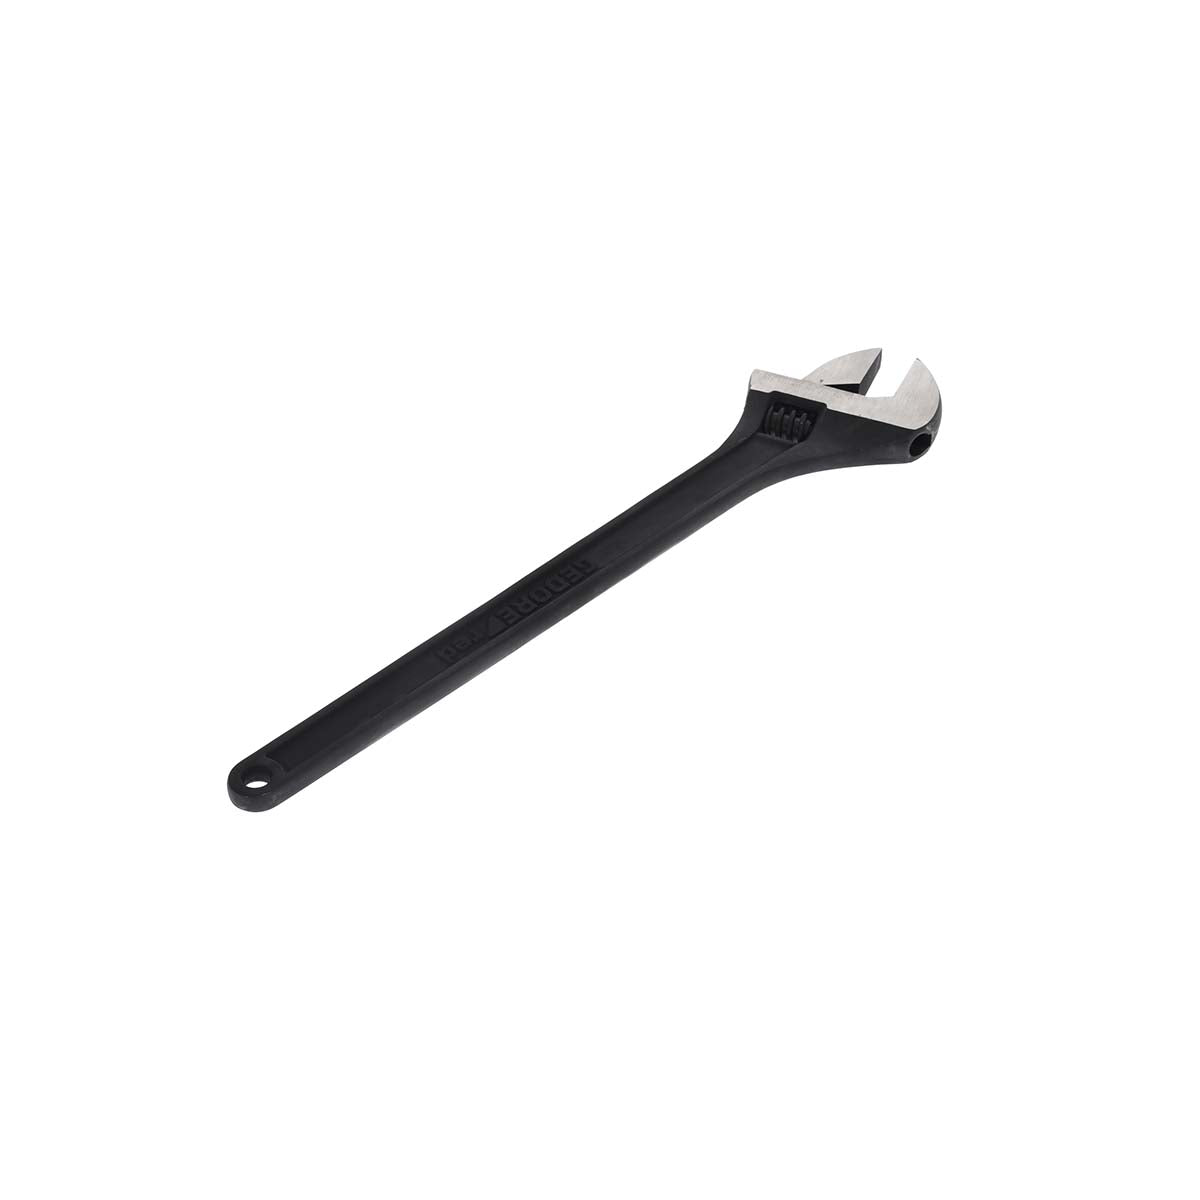 GEDORE red R03800024 - 24" 610 mm phosphated adjustable wrench (3301066)